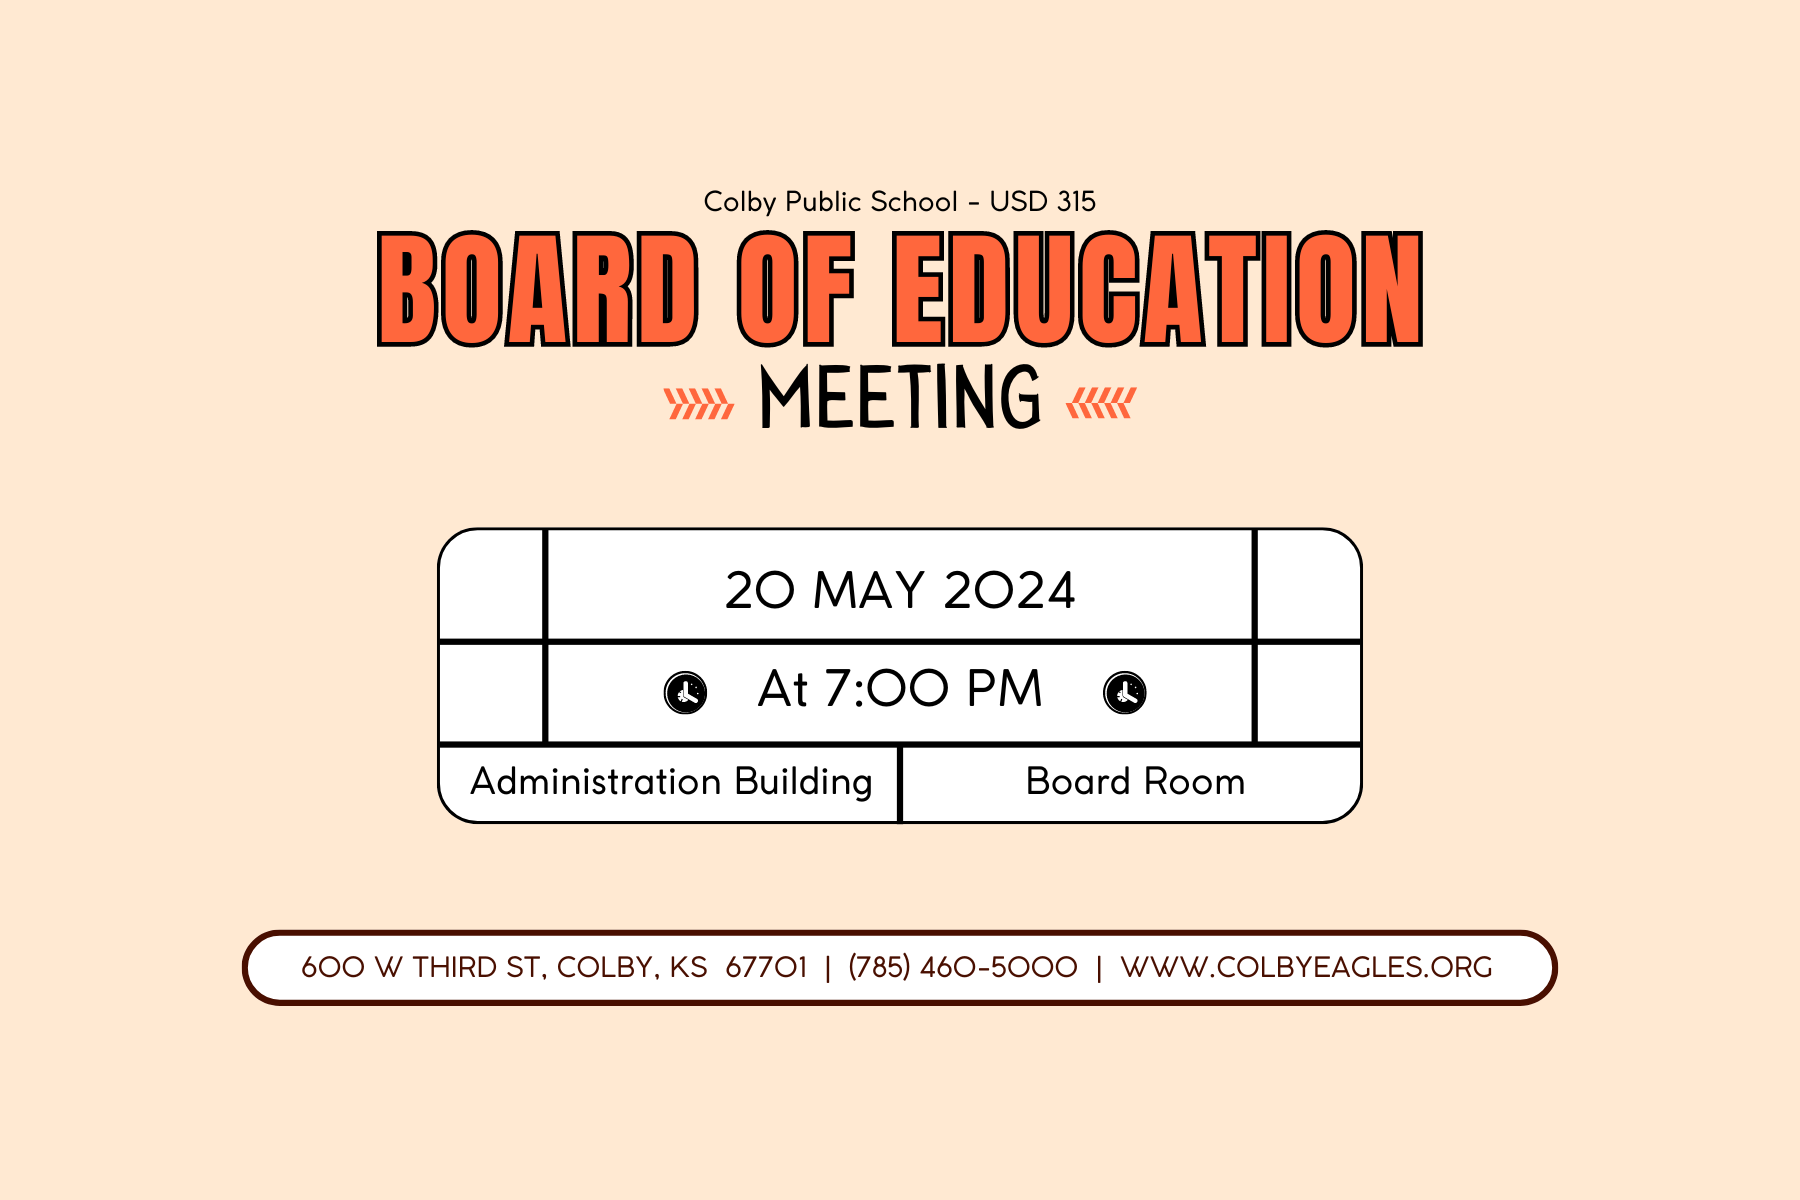 Peach background with the text "Colby Public School - USD 315 Board of Education Meeting, 25 March 2024 at 7:00 PM, Administration Building, Board Room, 600 W Third St, Colby, KS  67701, (785) 460-5000, www.colbyeagles.org"